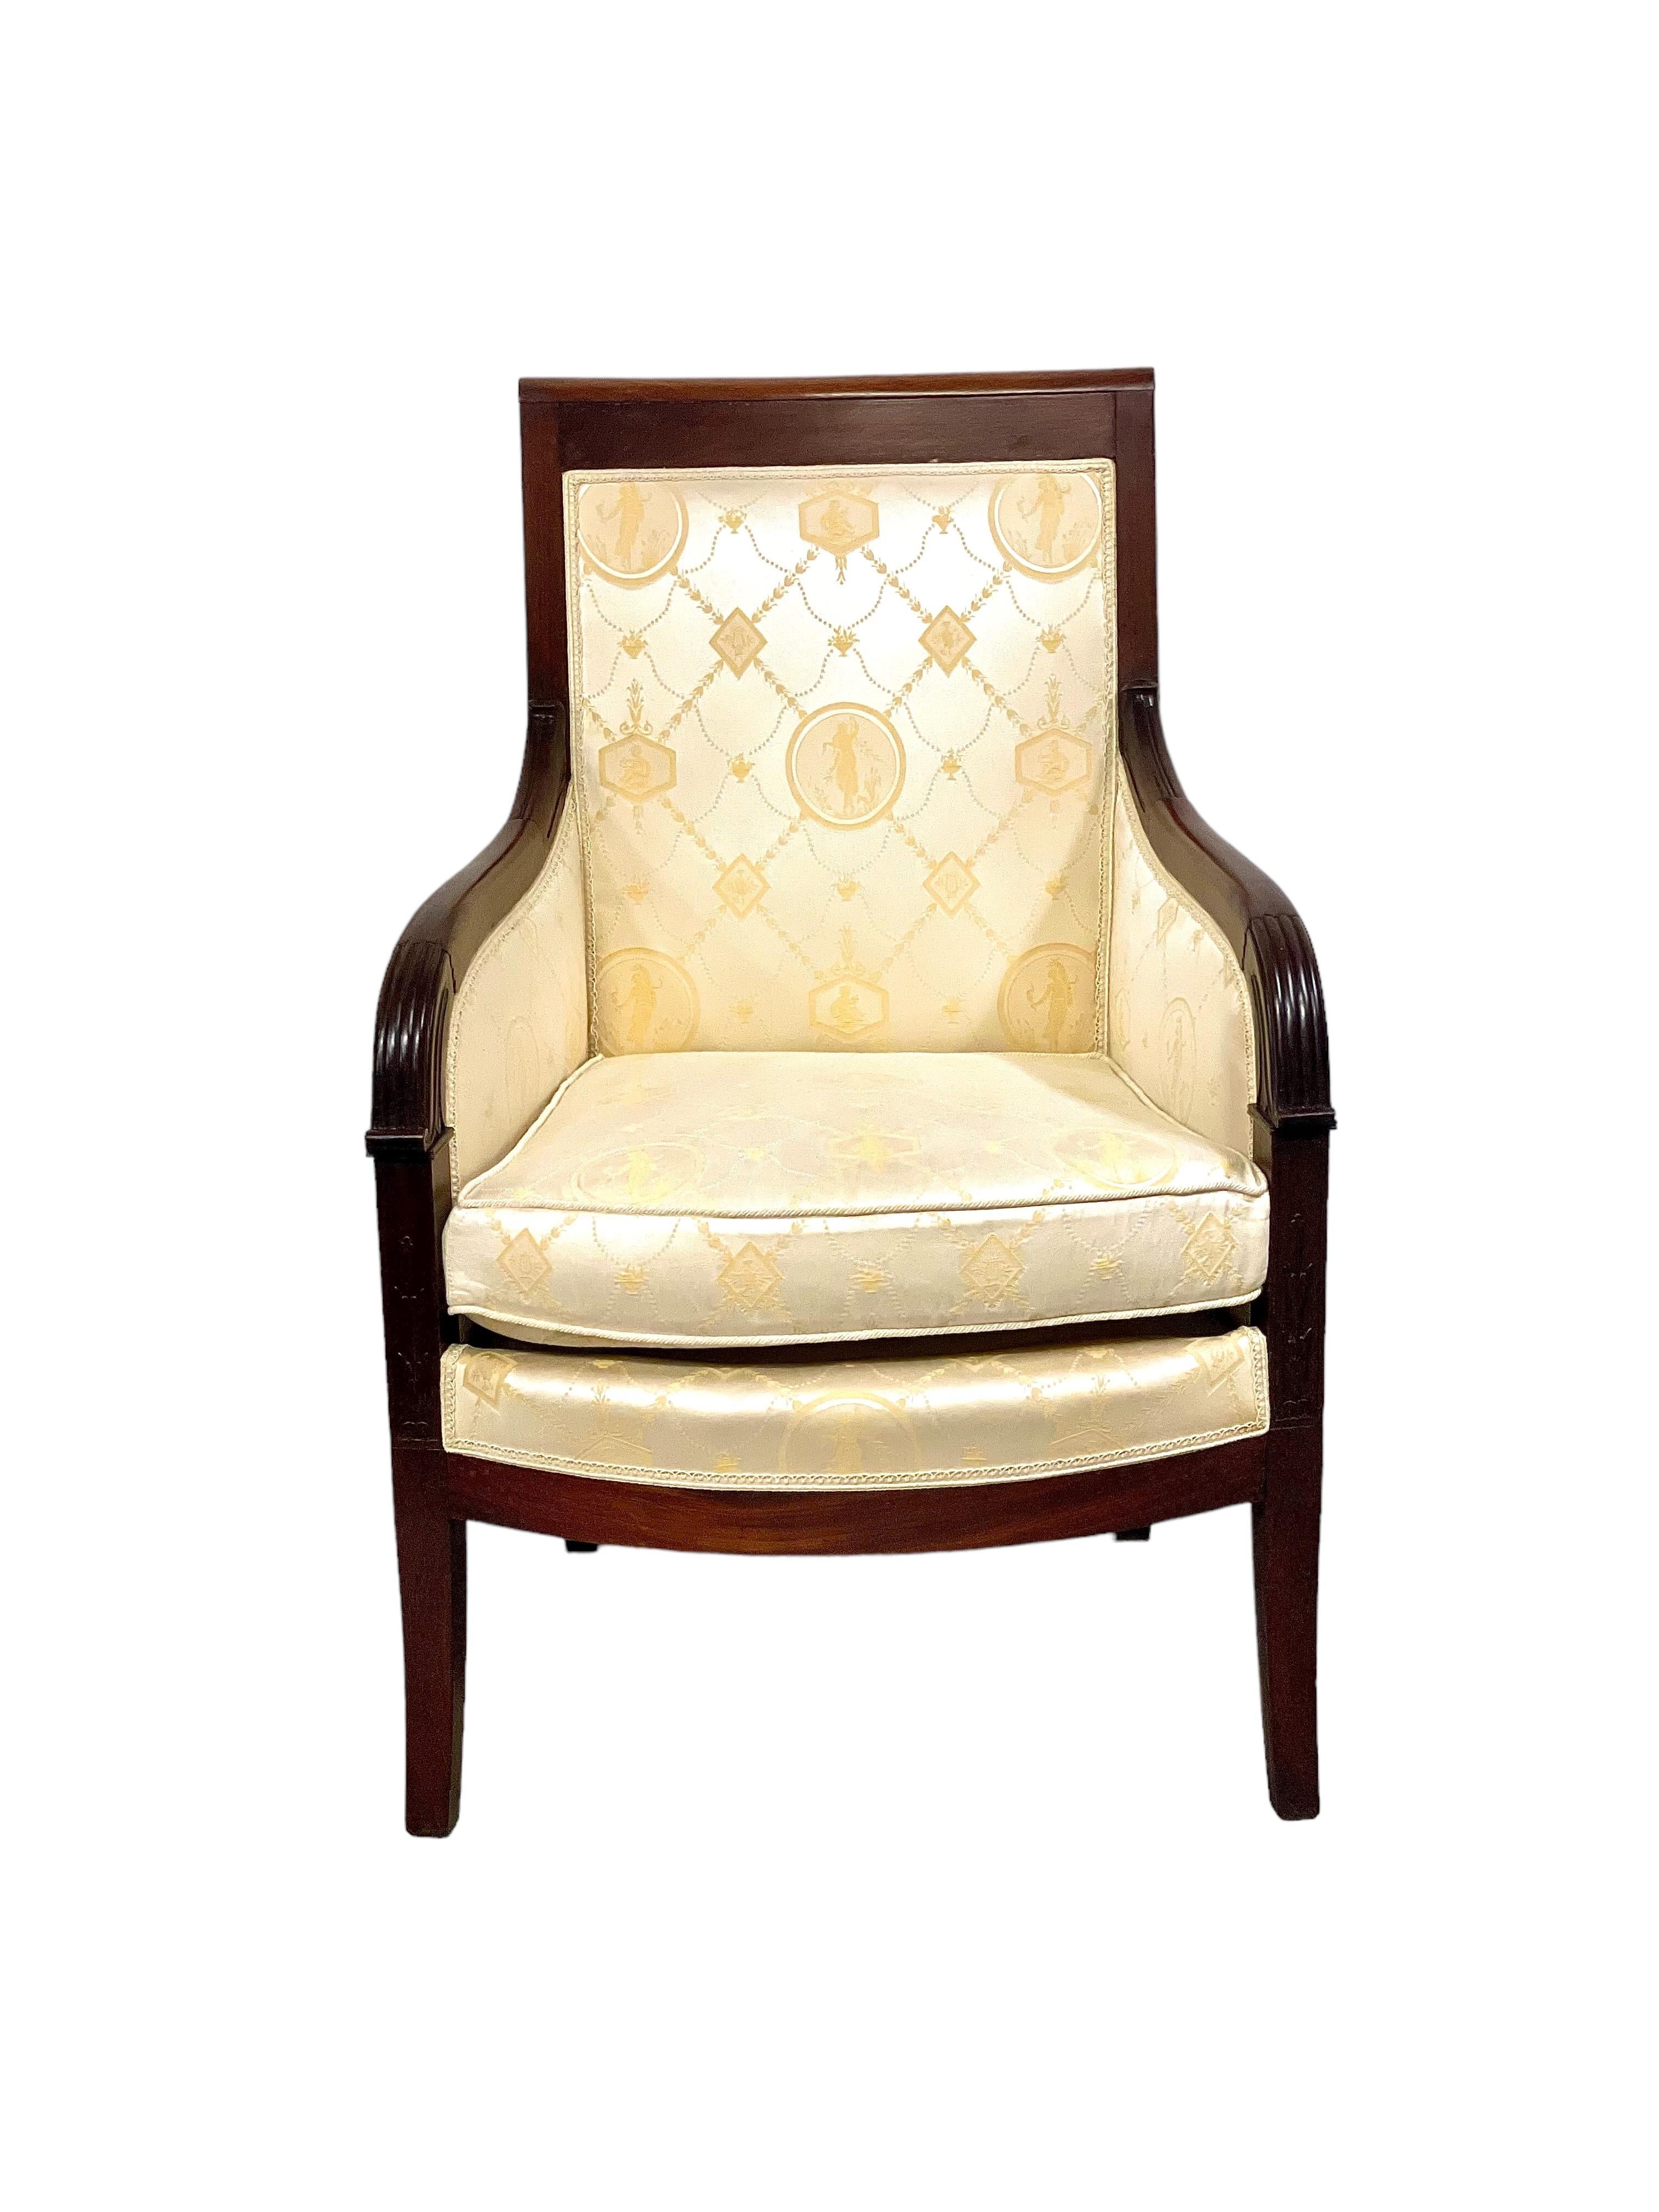 A handsome pair of fabric Bergère armchairs in solid mahogany and mahogany veneer. Dating from the Empire period, these very striking chairs are in excellent condition, with exquisitely woven cream fabric upholstery featuring a classic design of